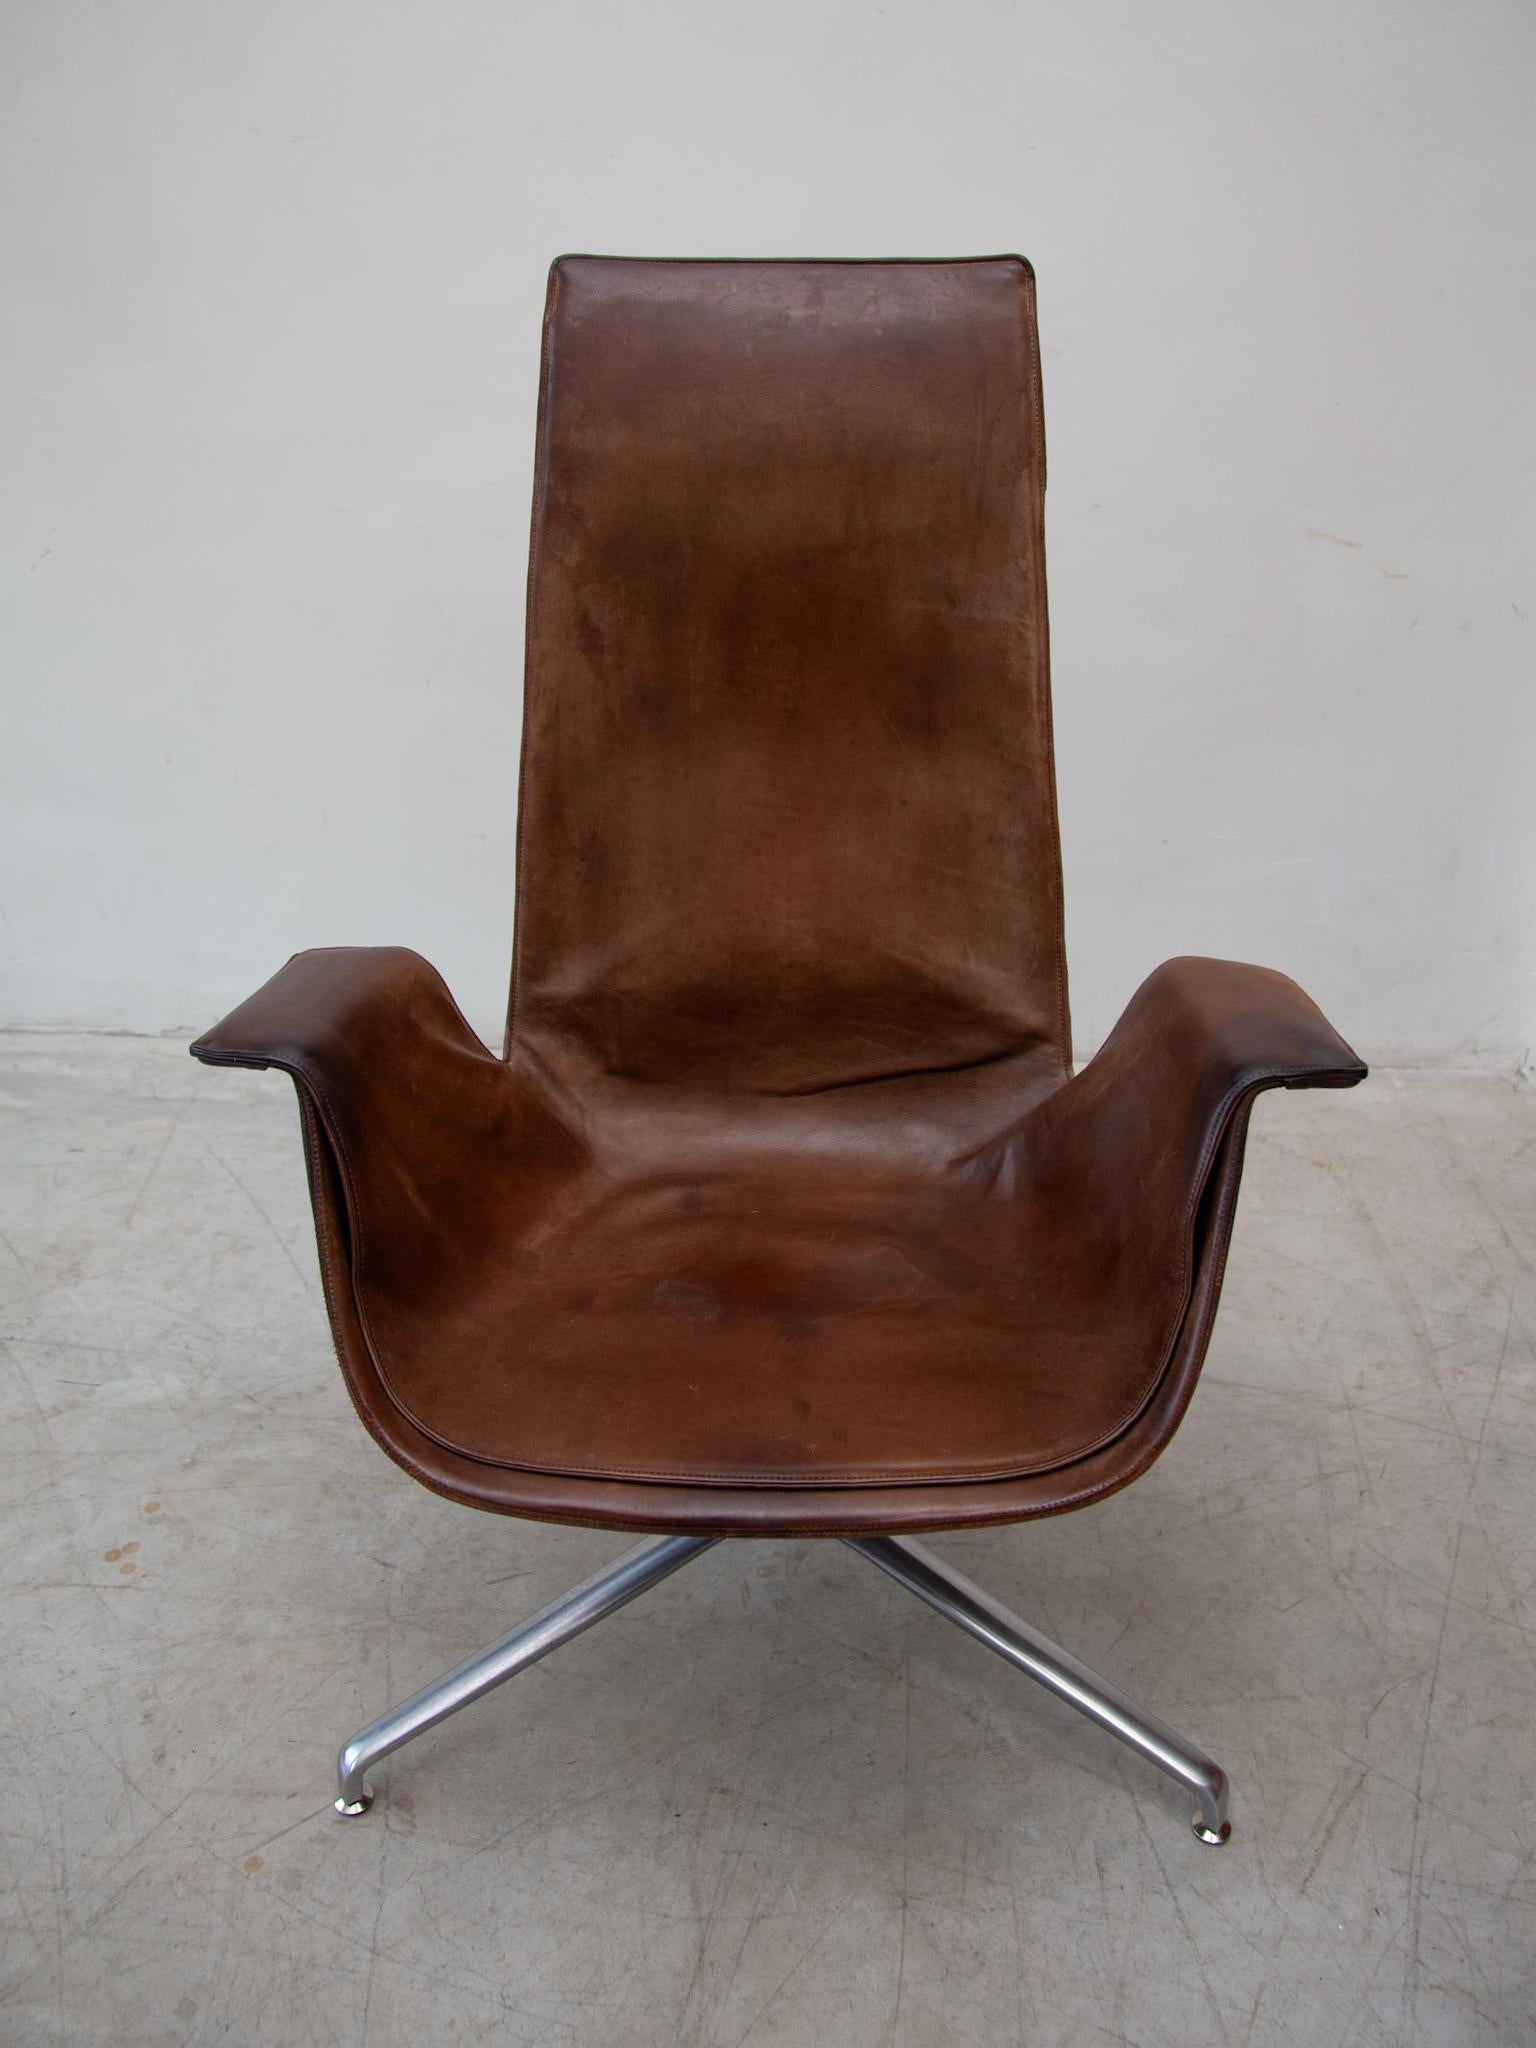 A timeless sculpture of modernity, chocolate brown leather beautiful FK 6725 lounge chair designed in 1964, the model received a federal award for good form. As a meeting lounge chair, designed by Preben Fabricius and Jörgen Kastholm, the models